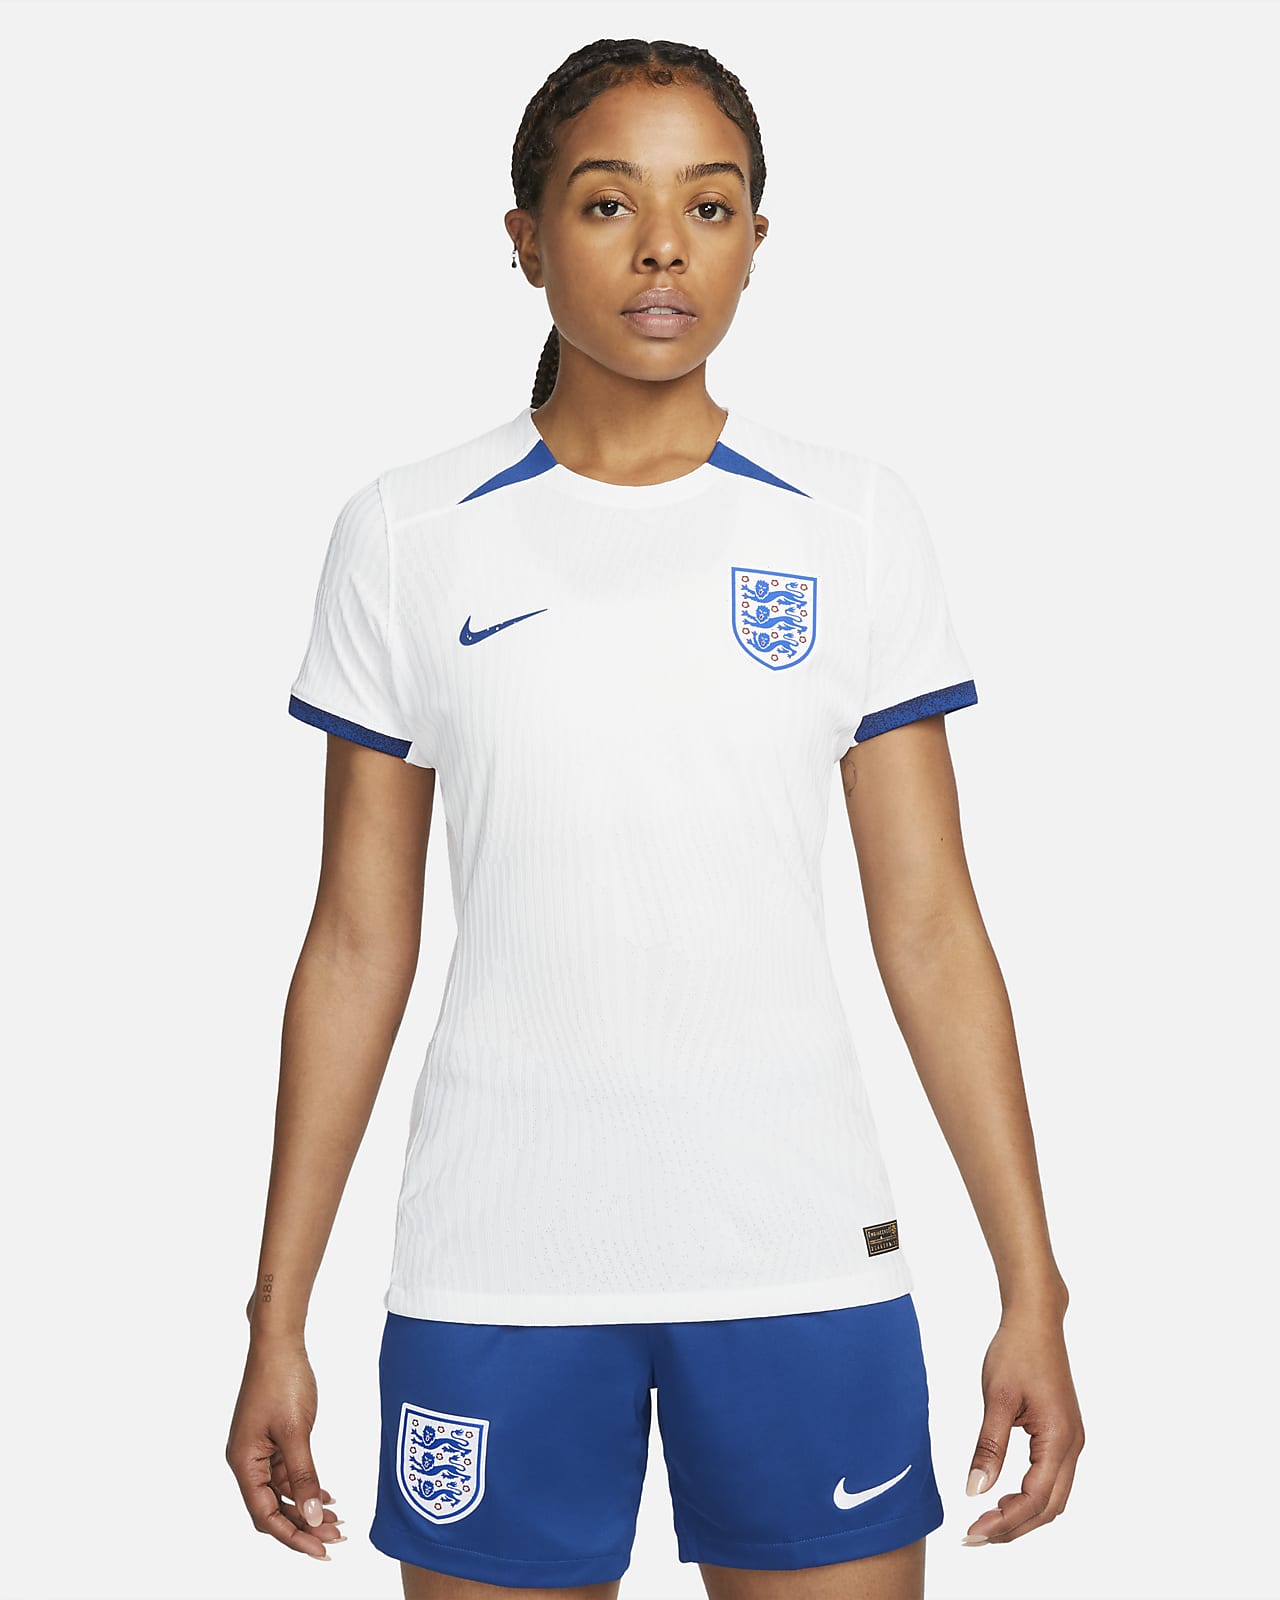 Lionesses kit 2023: Where to buy the England women's team shirts